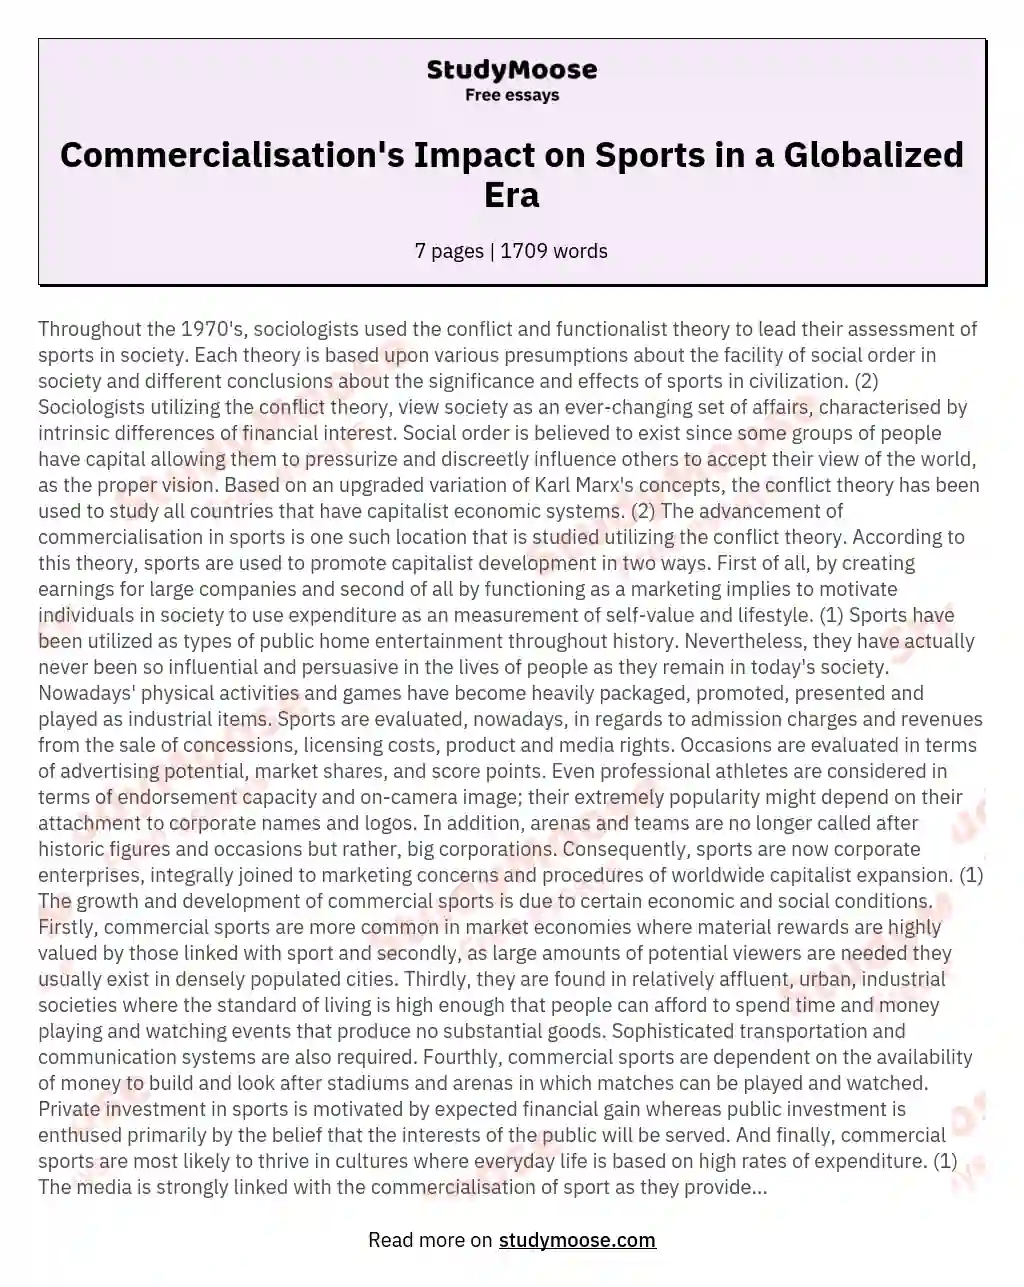 Commercialisation's Impact on Sports in a Globalized Era essay